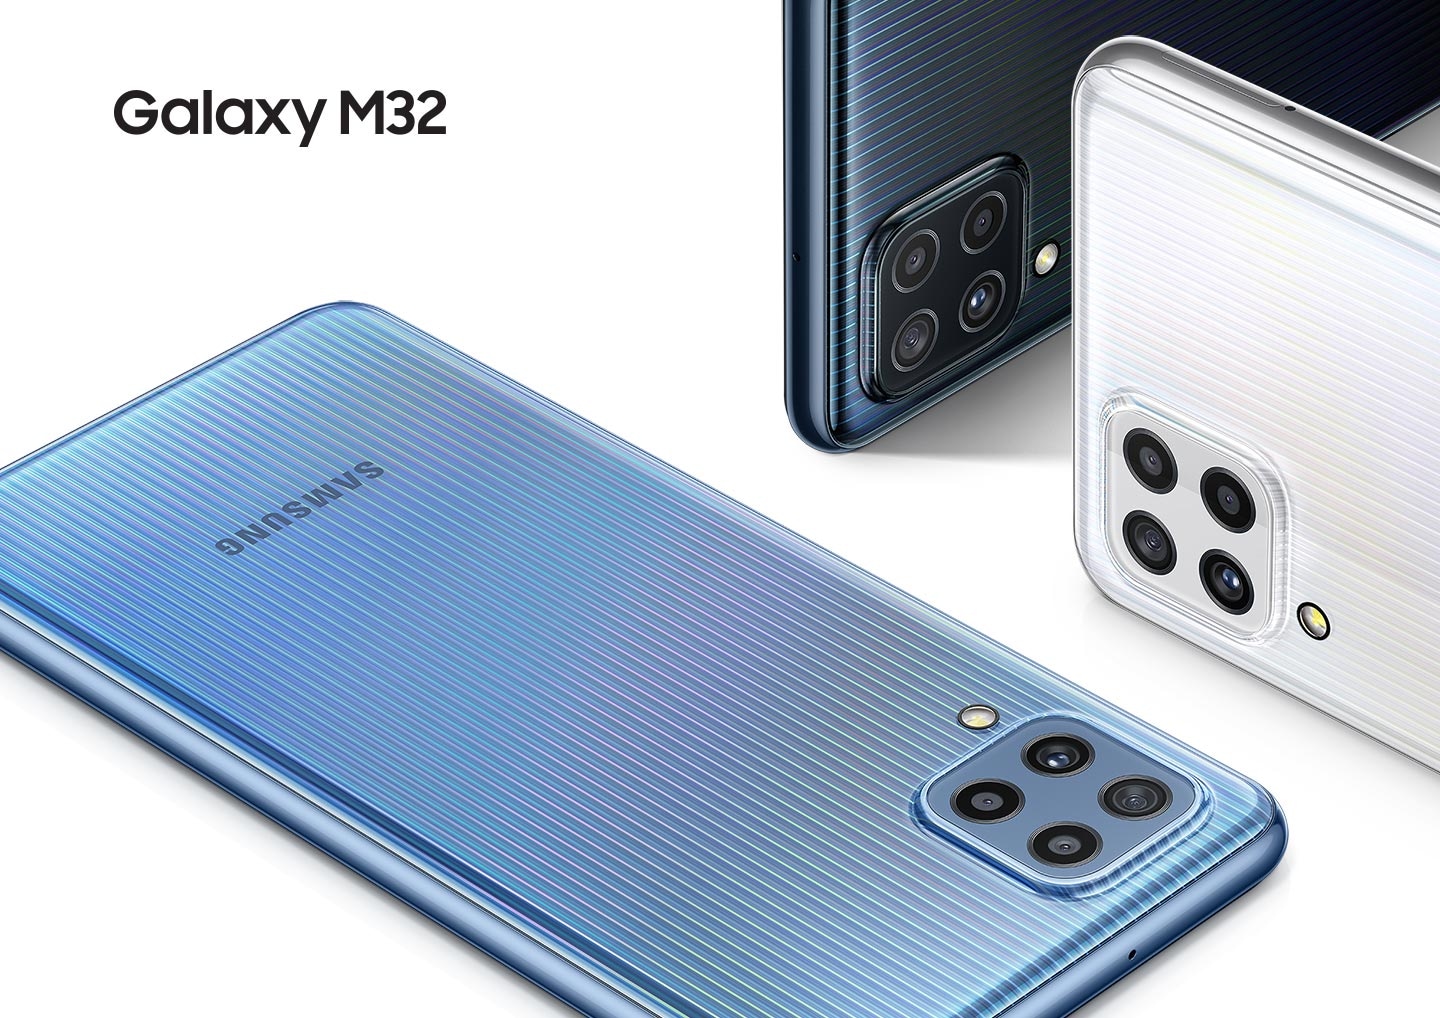 Three Galaxy M32 phones are displayed; sky blue one seen from the rear with the front screen facing down.The black and white ones are laying on the side with just a small part of the devices showing.